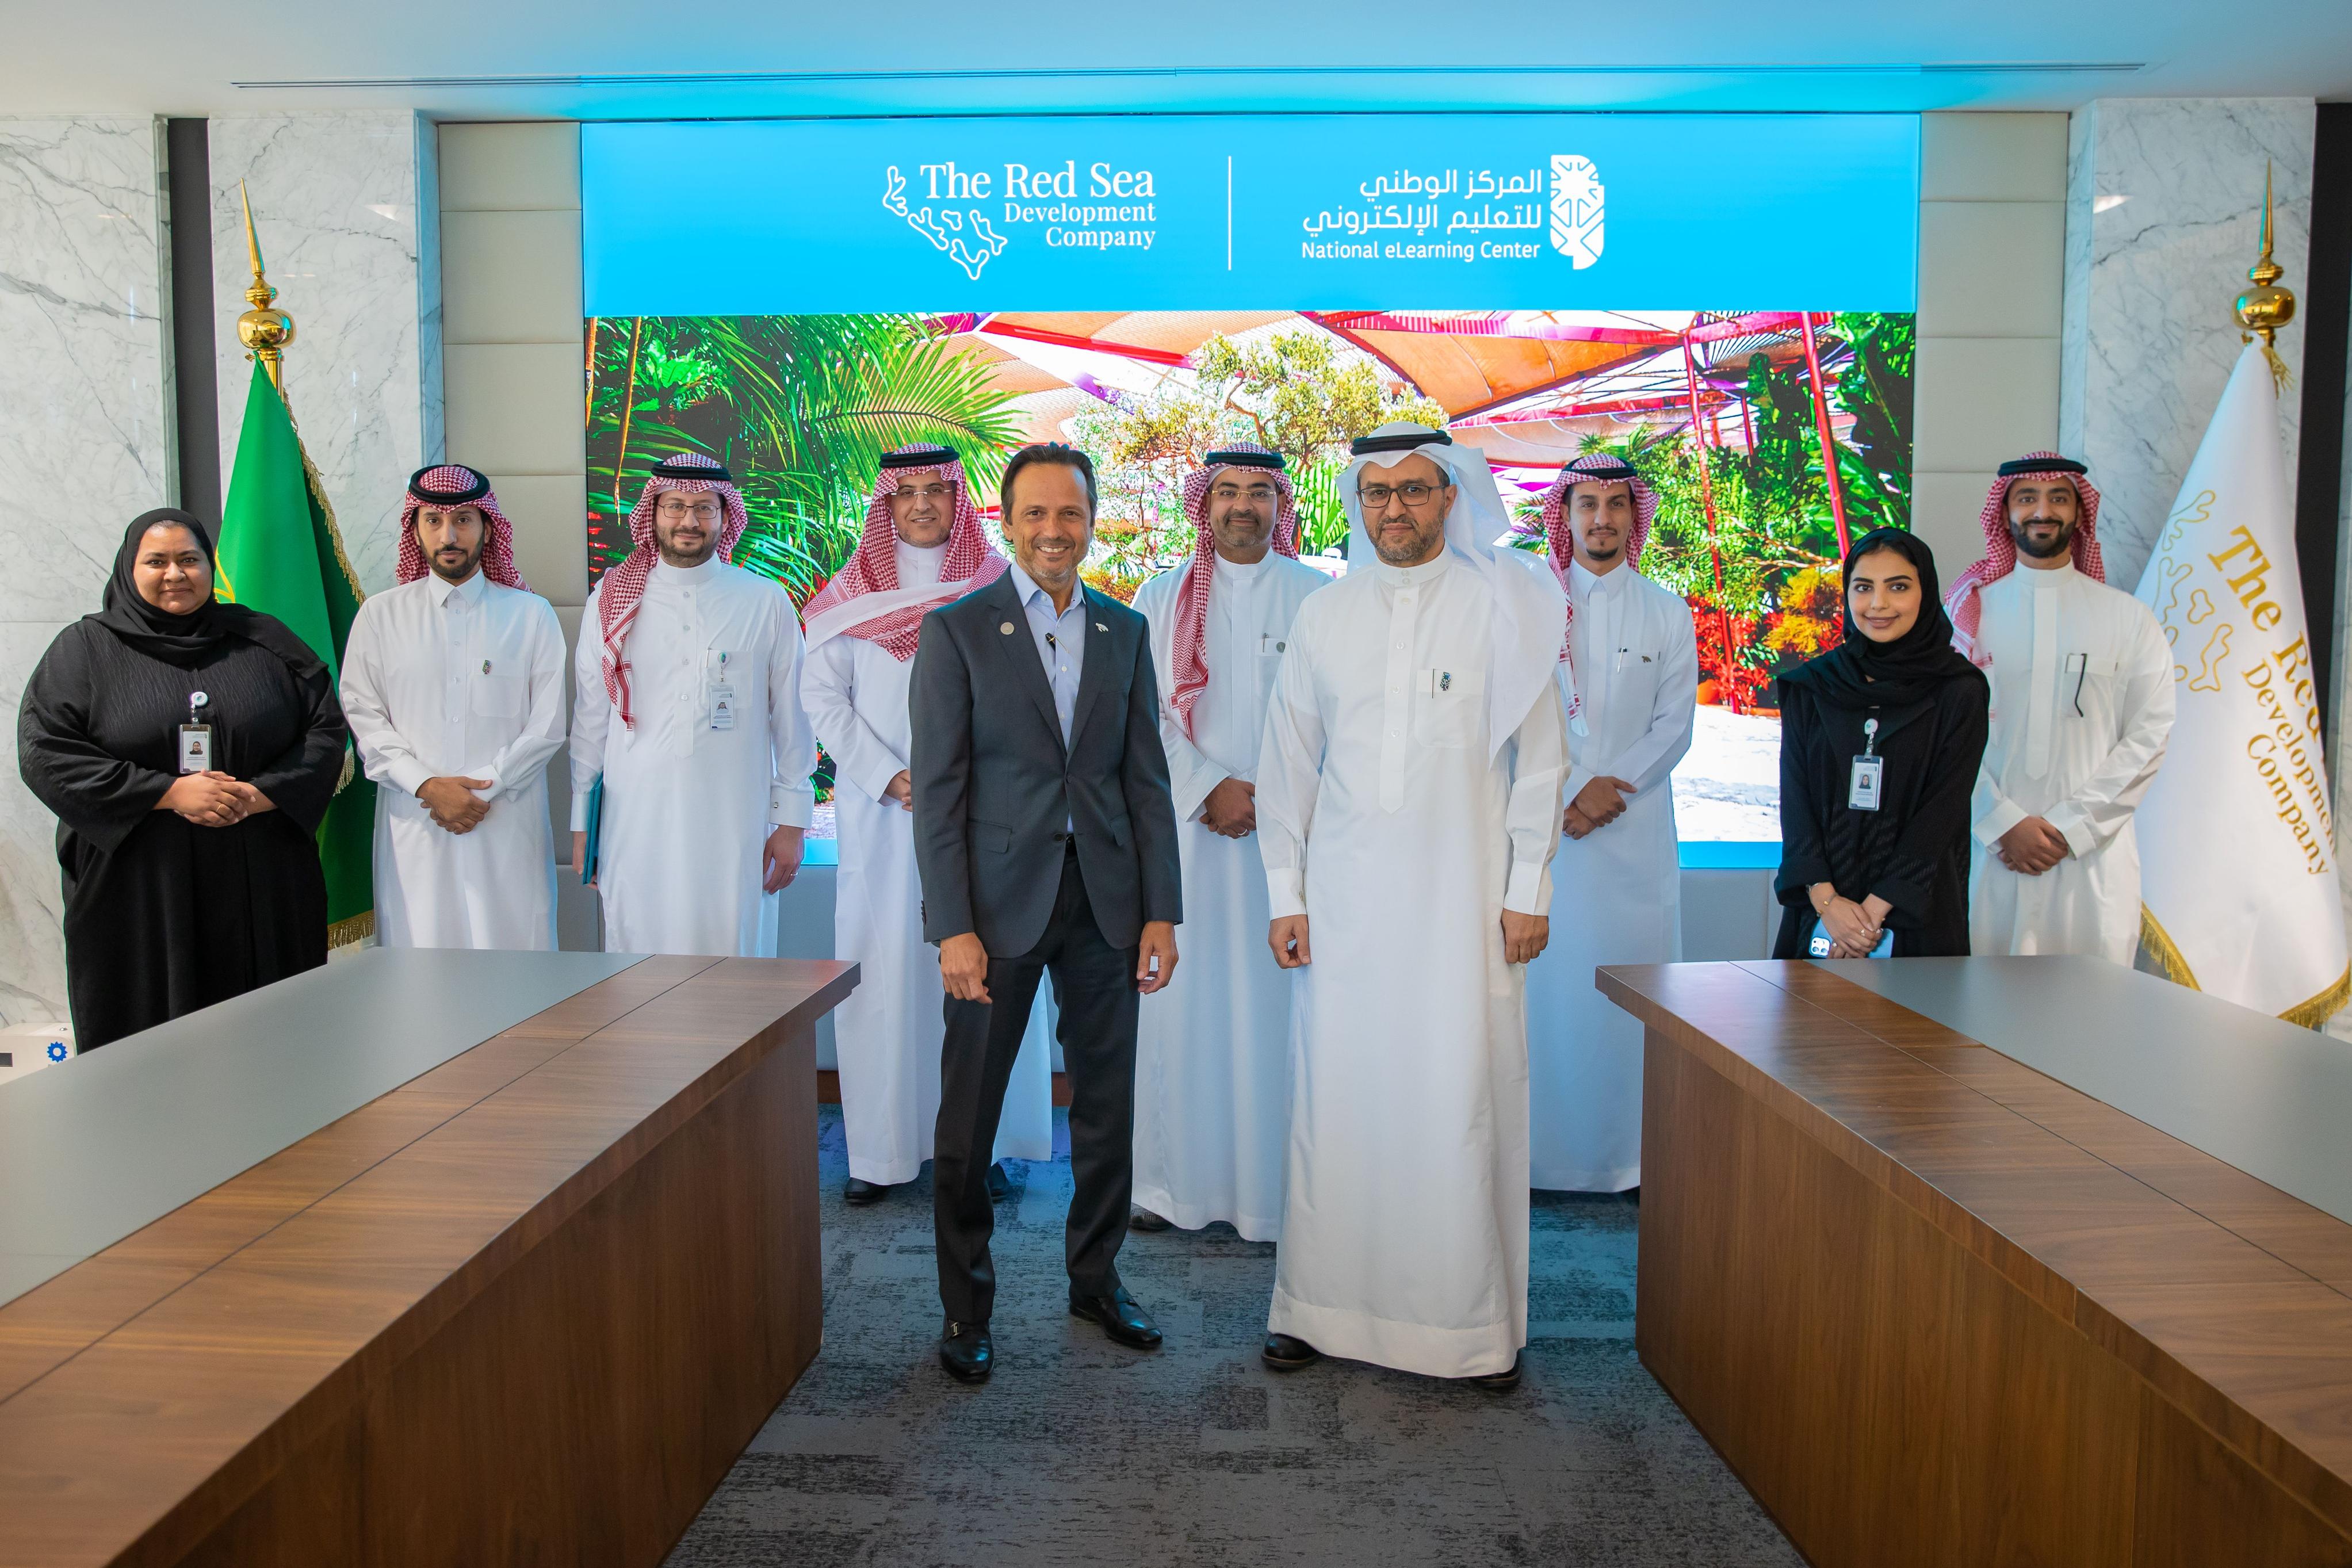 Red Sea Global Partners with the National eLearning Center to Enhance Professional Development Opportunities